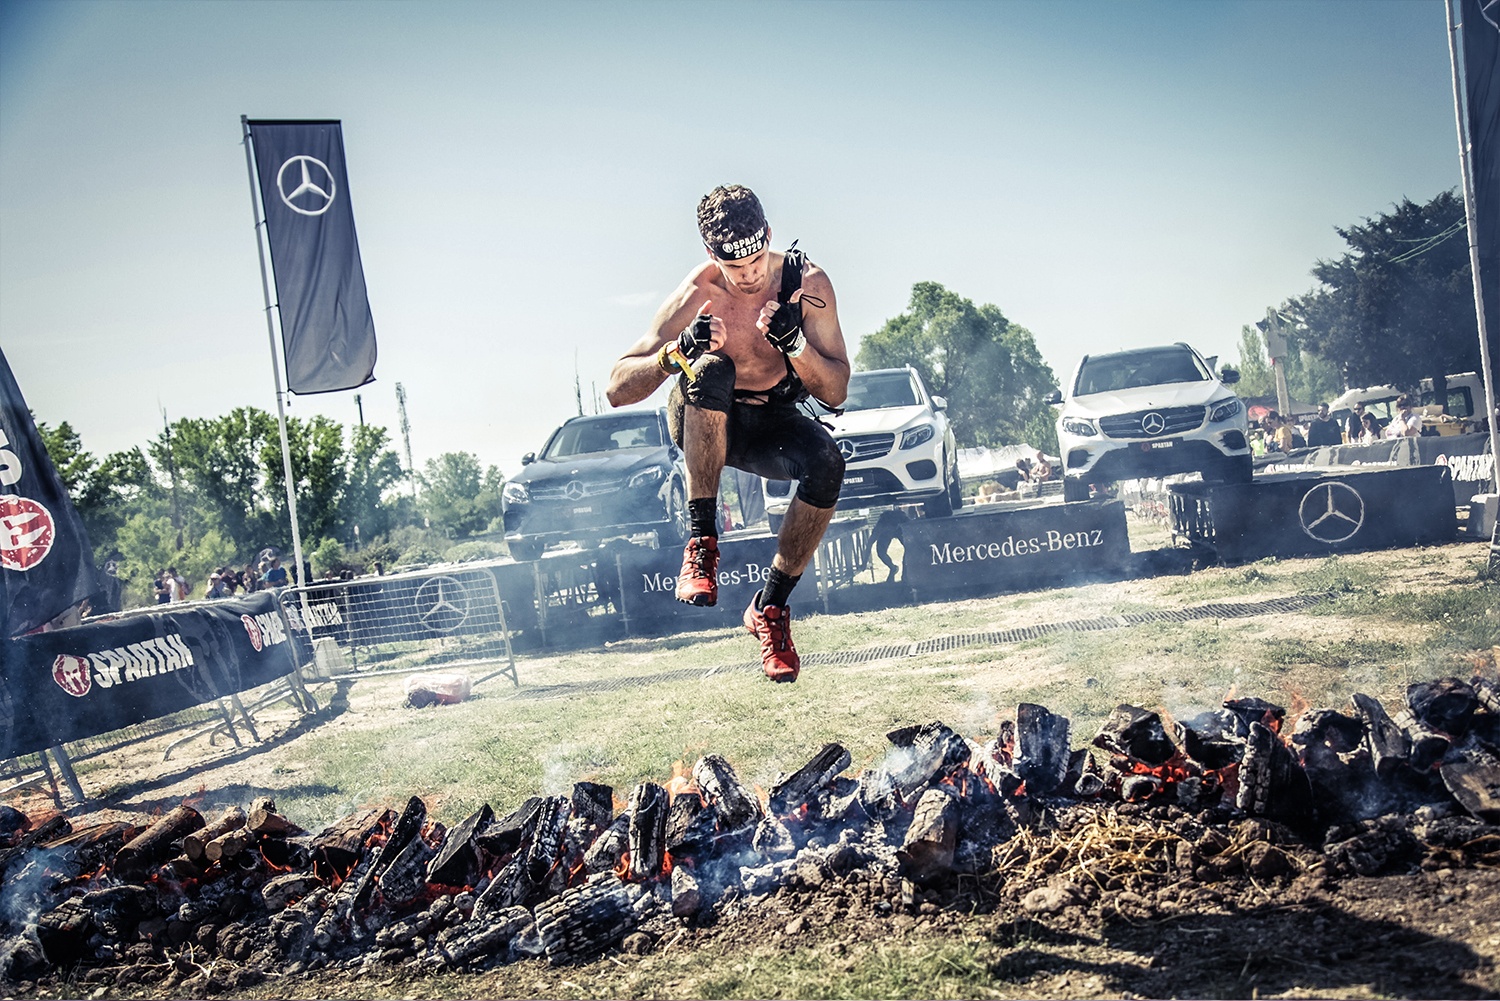 Obstacle Course Race in the Philippines - Spartan